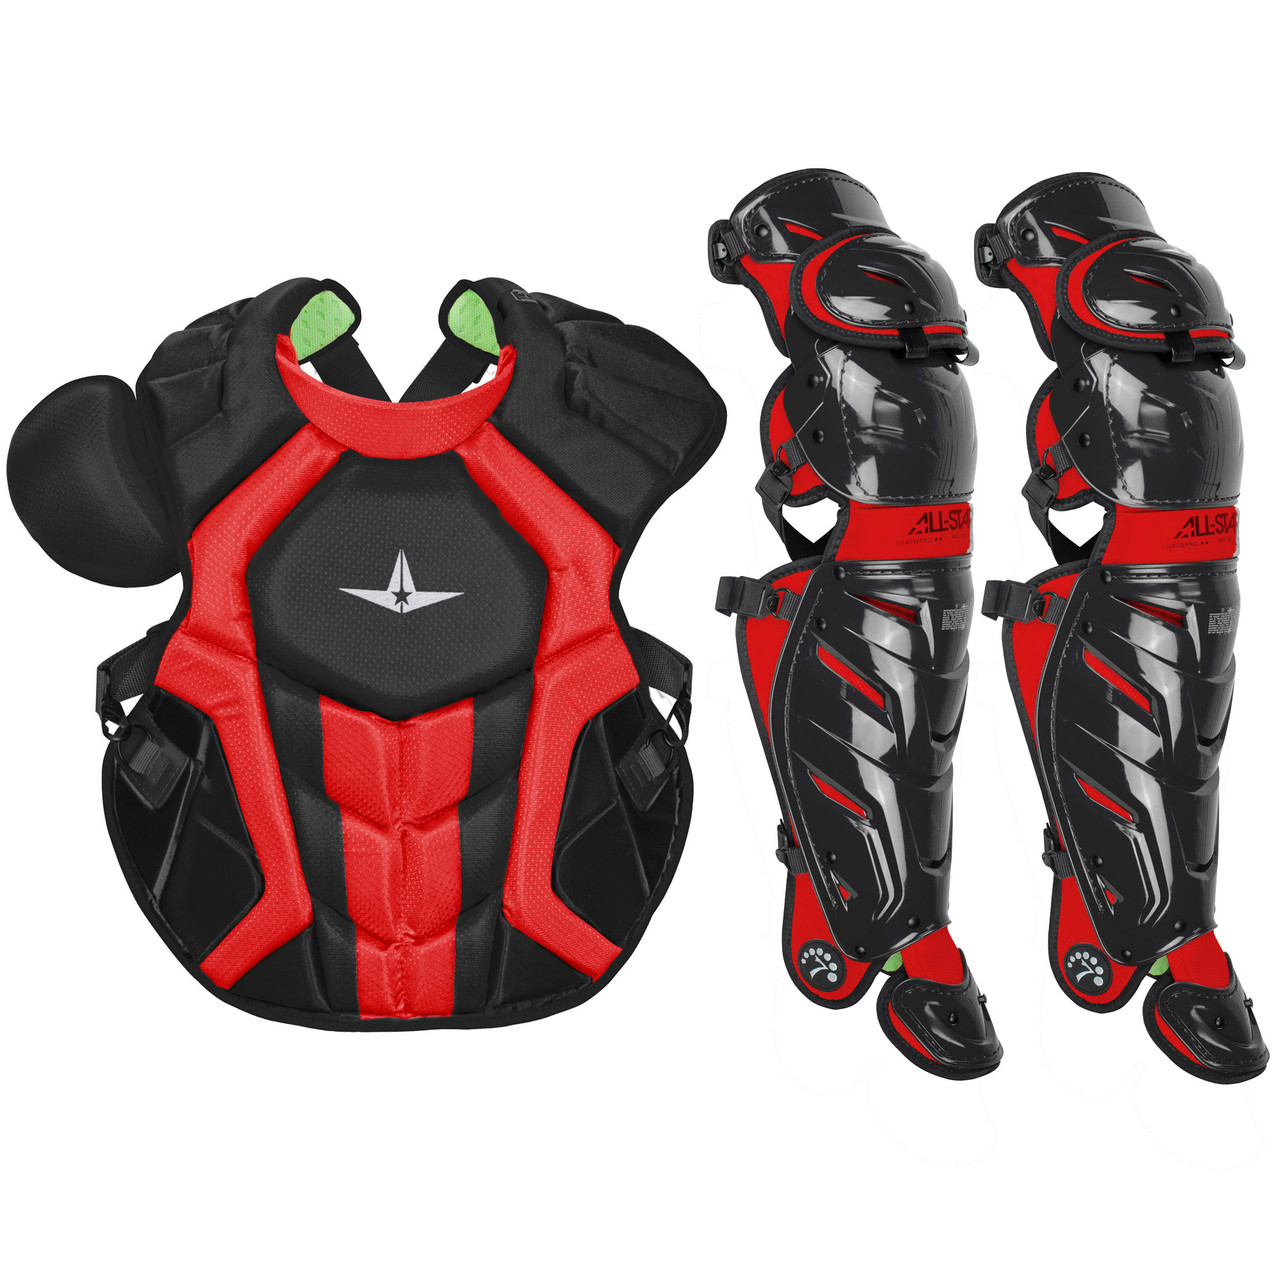 All-Star System7 Axis NOCSAE Adult Baseball Catcher's Gear Set 